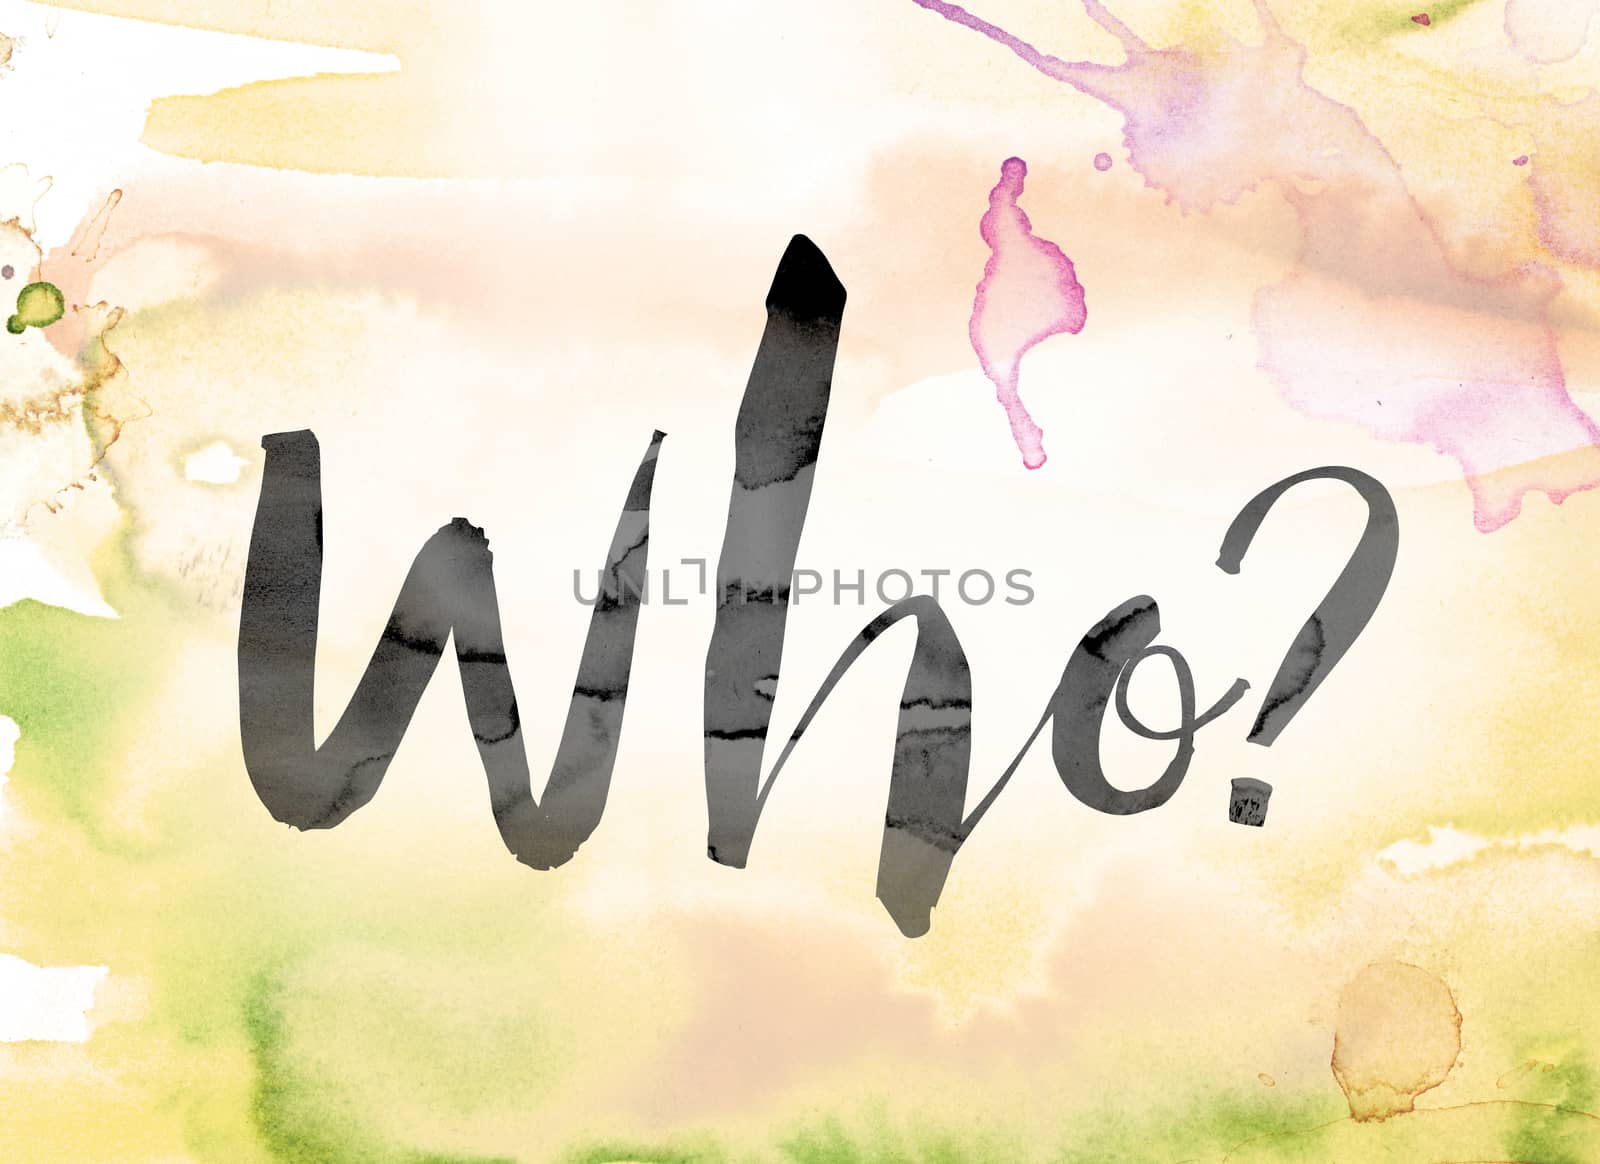 The word "Who" painted in black ink over a colorful watercolor washed background concept and theme.